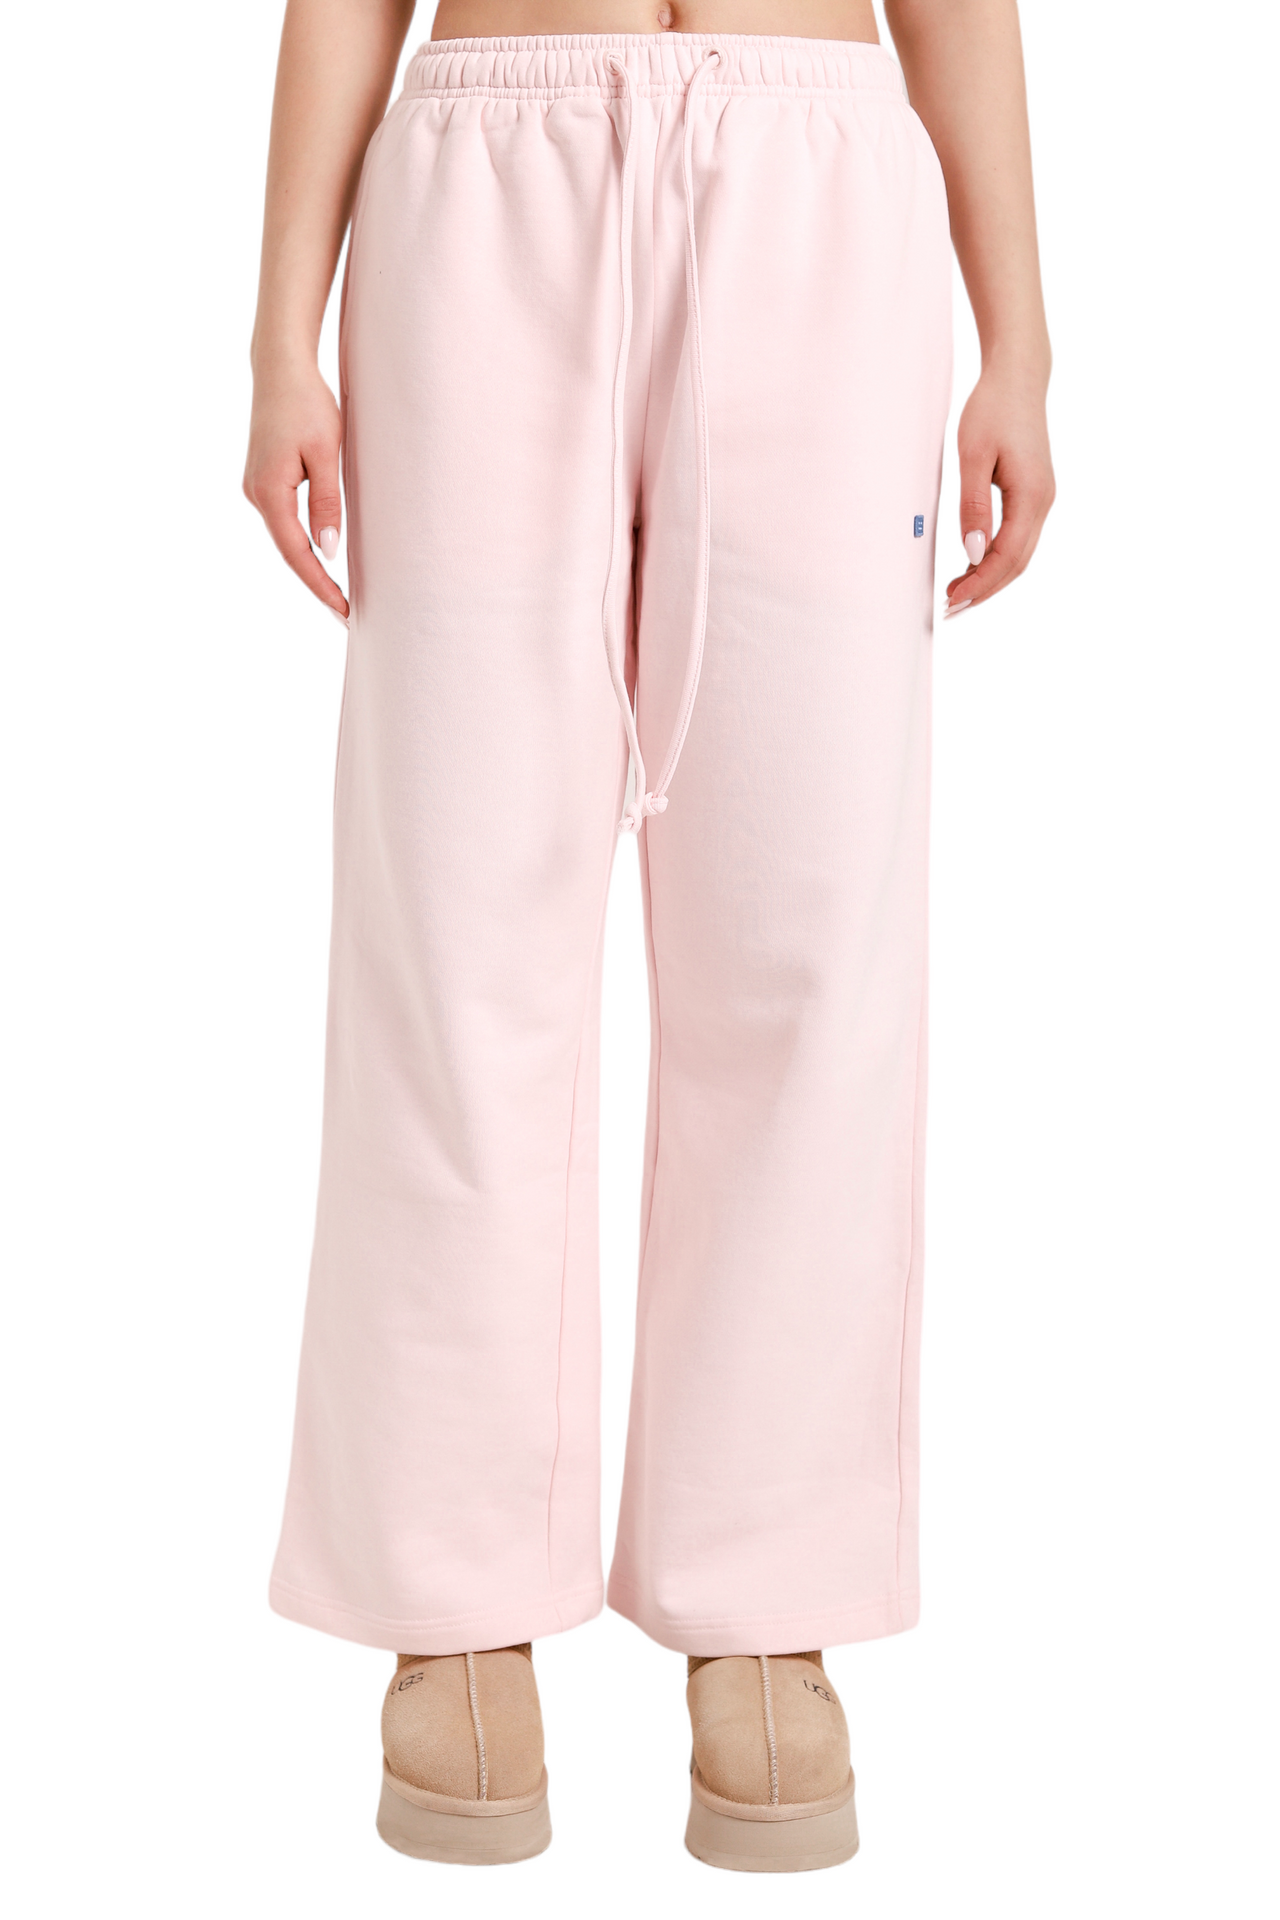 Acne Studios Wide Leg Logo Embroidered Sweatpants Pink